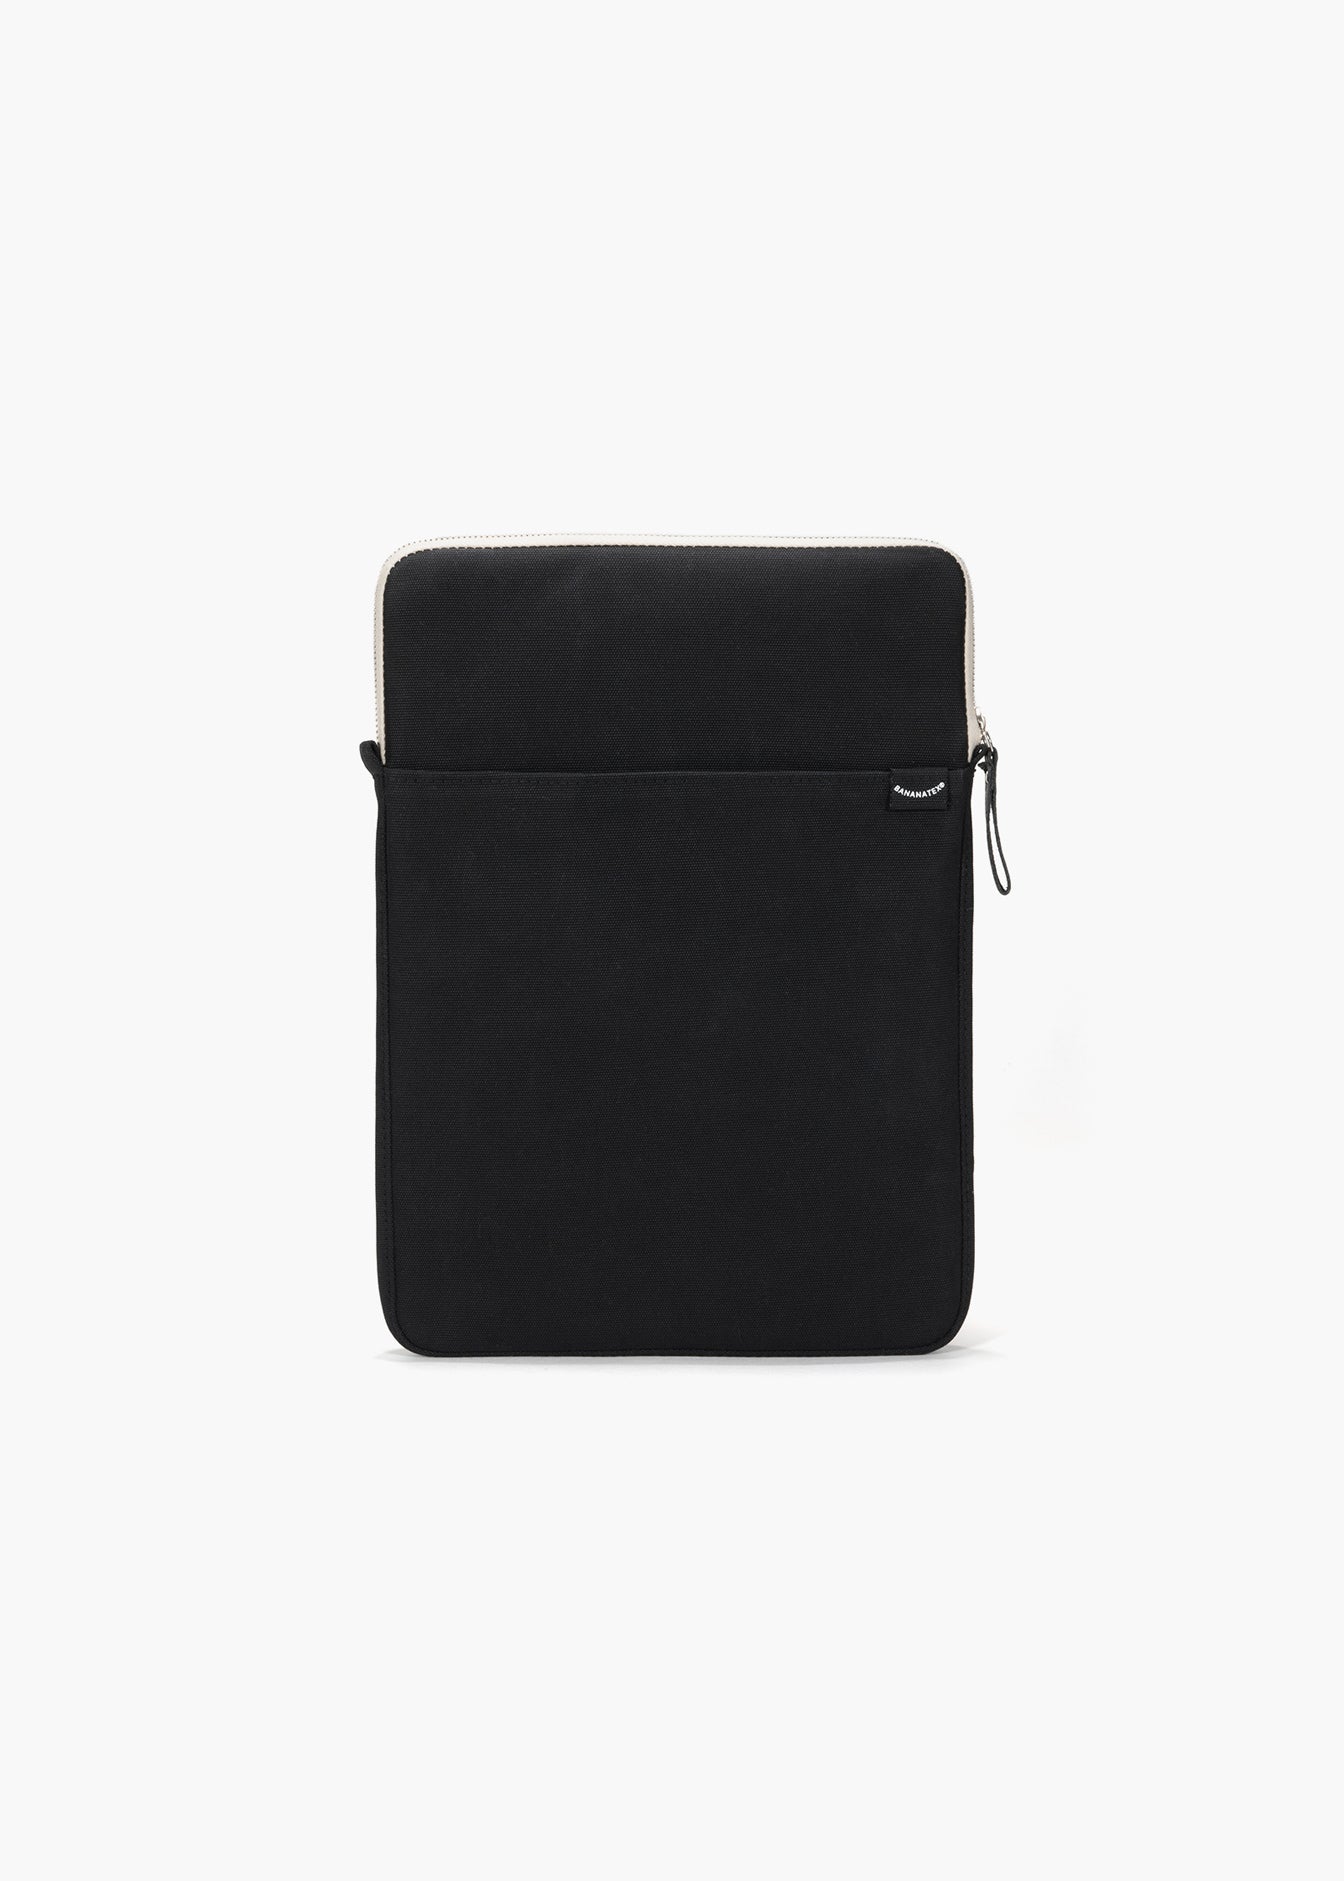 Bananatex Sleeve for Macbook 15" – All Black - QWSTION